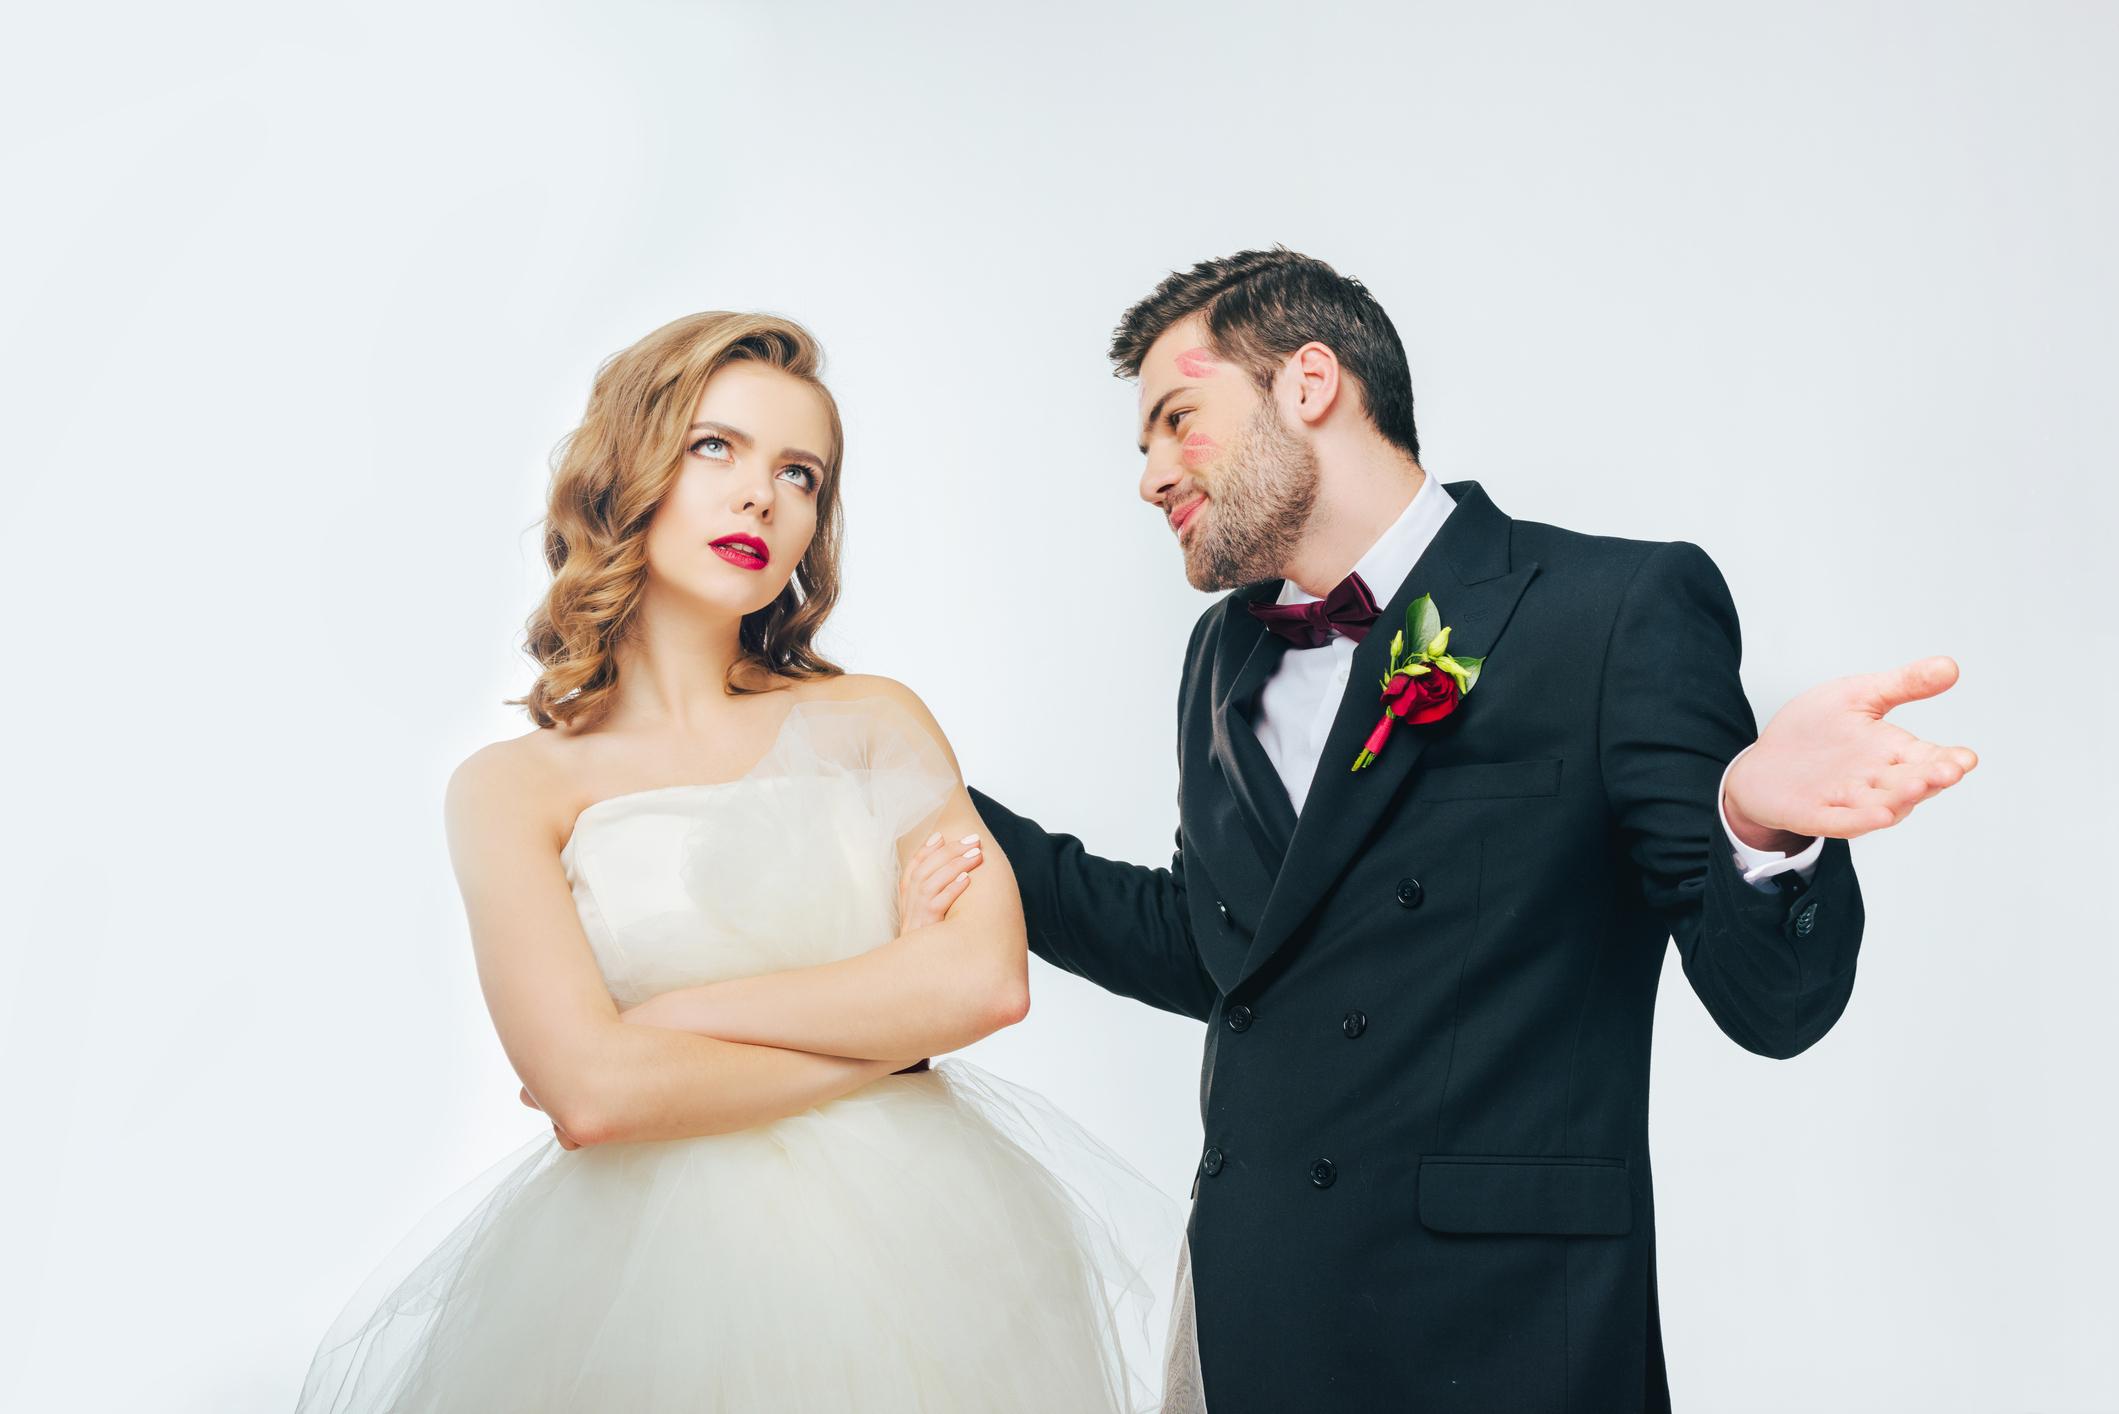 Bride in a strapless gown looks skeptically at groom in a tuxedo with a boutonniere who seems to be explaining something